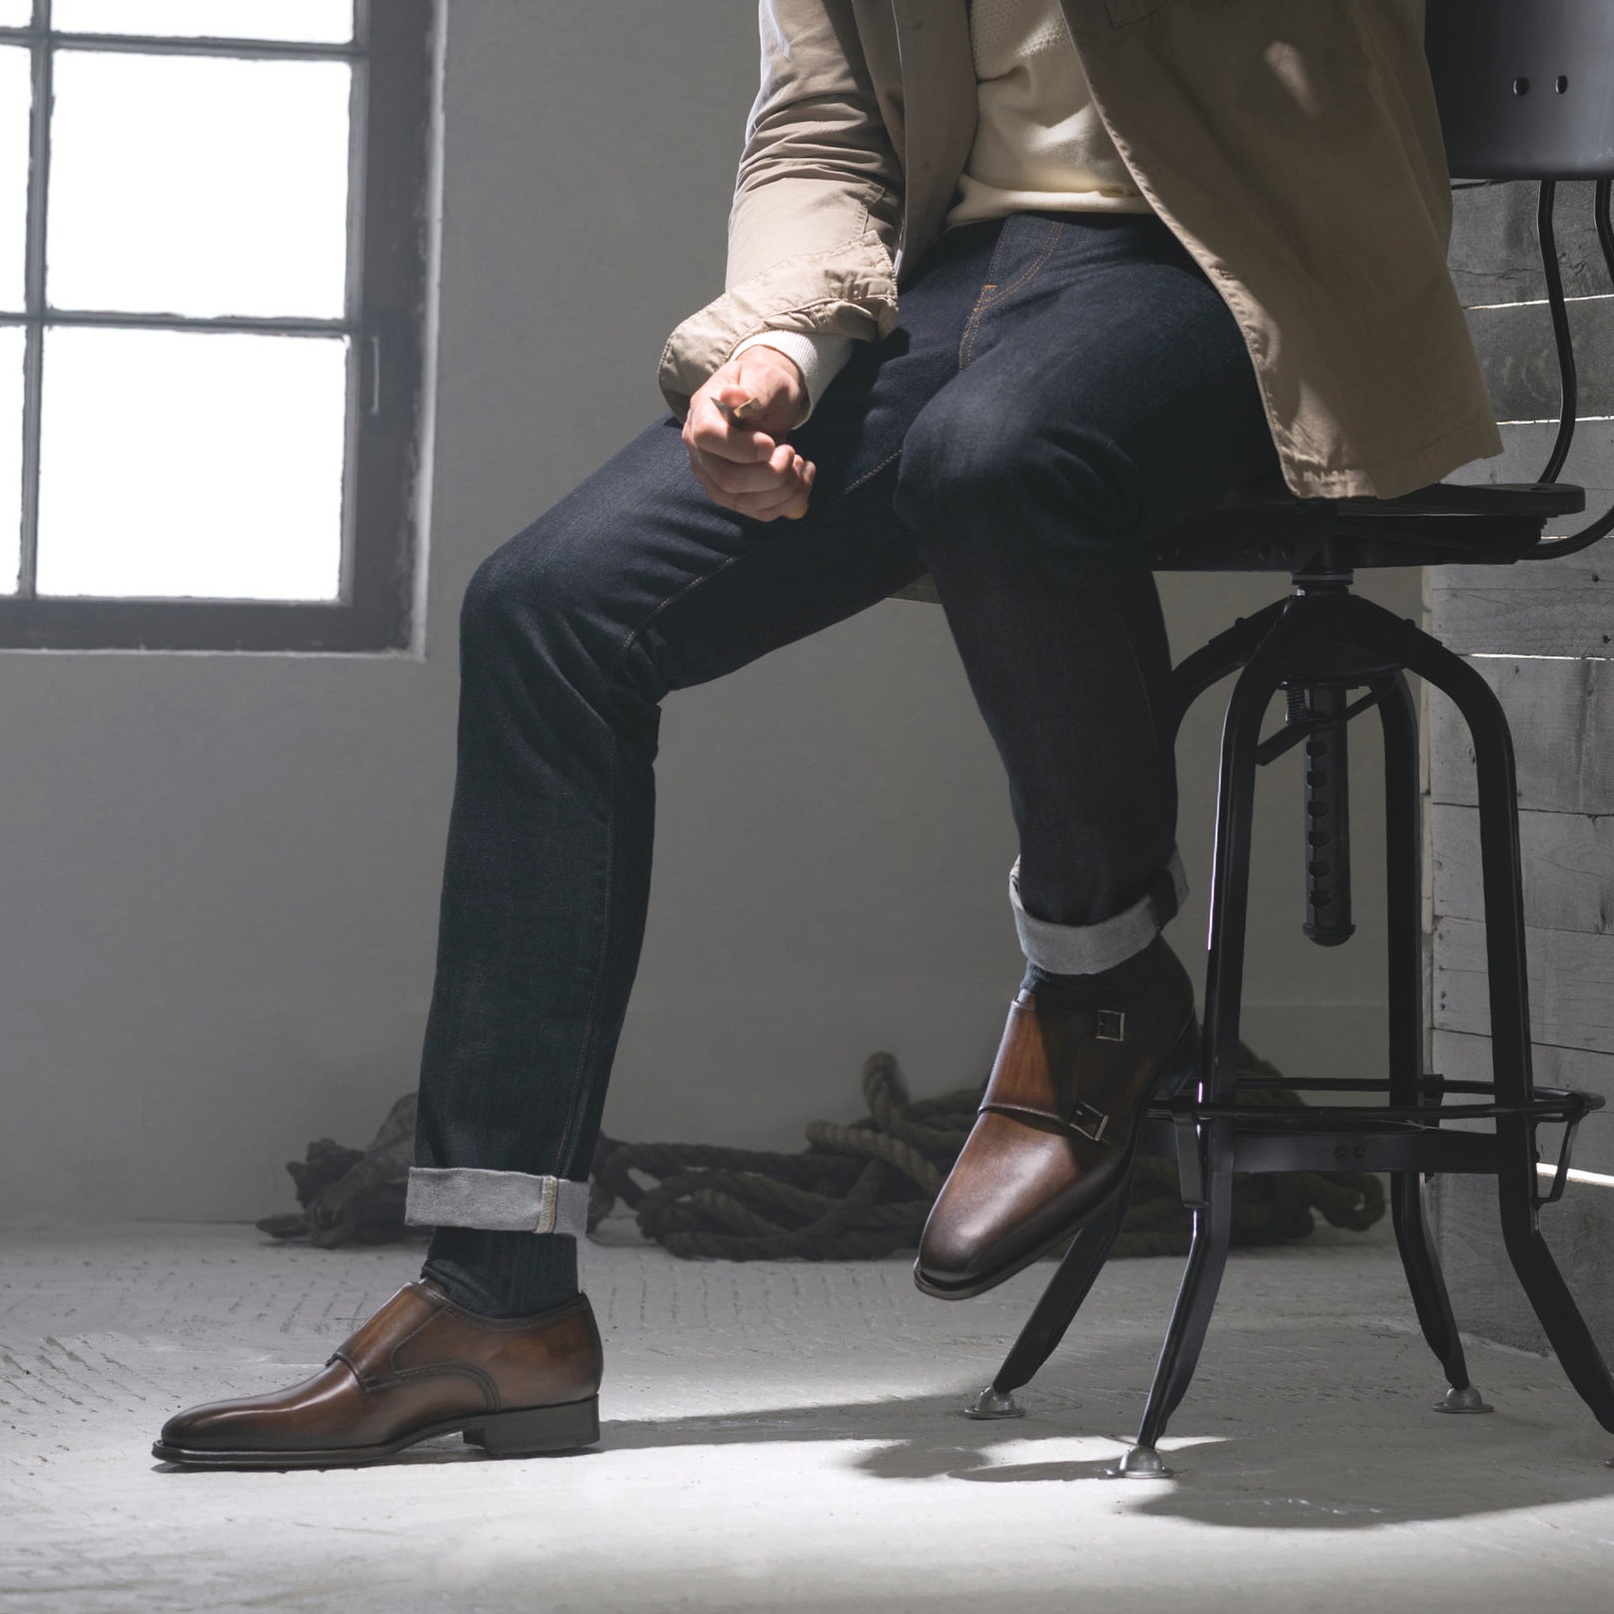 Melbourne Style: Magnanni Shoes in the Urban Scene